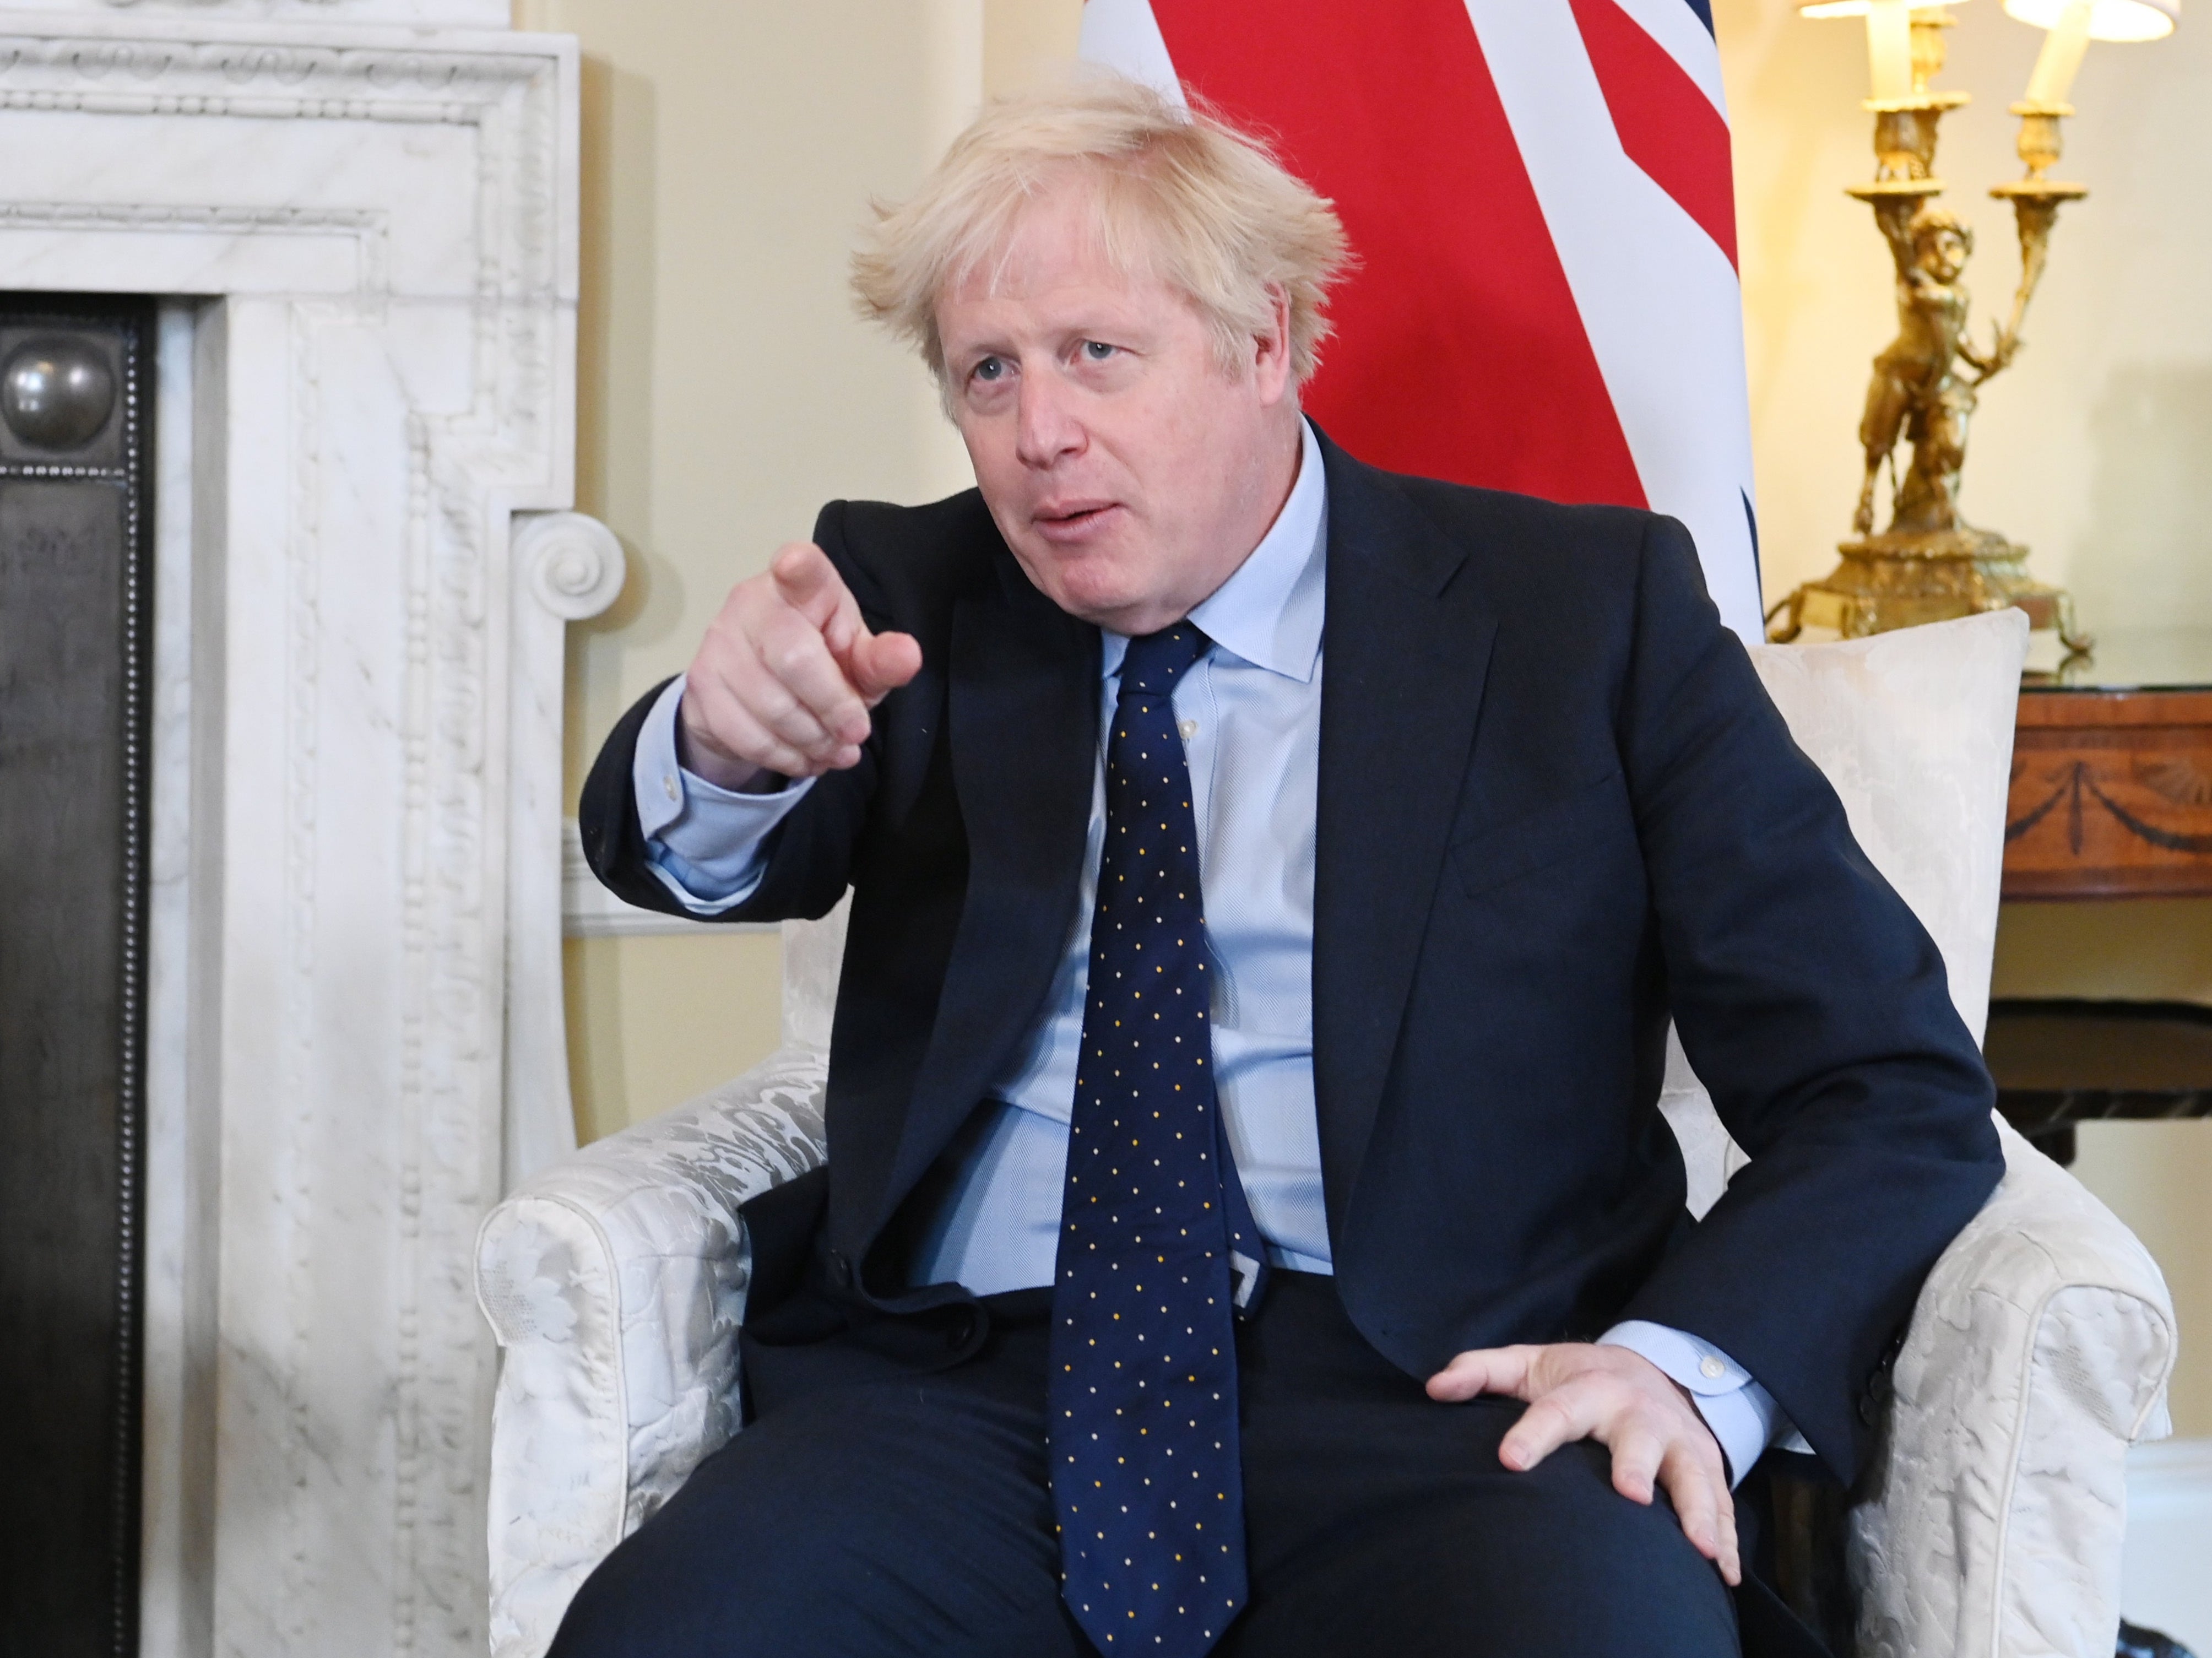 Boris Johnson has been accused of cronyism over his latest government appointment